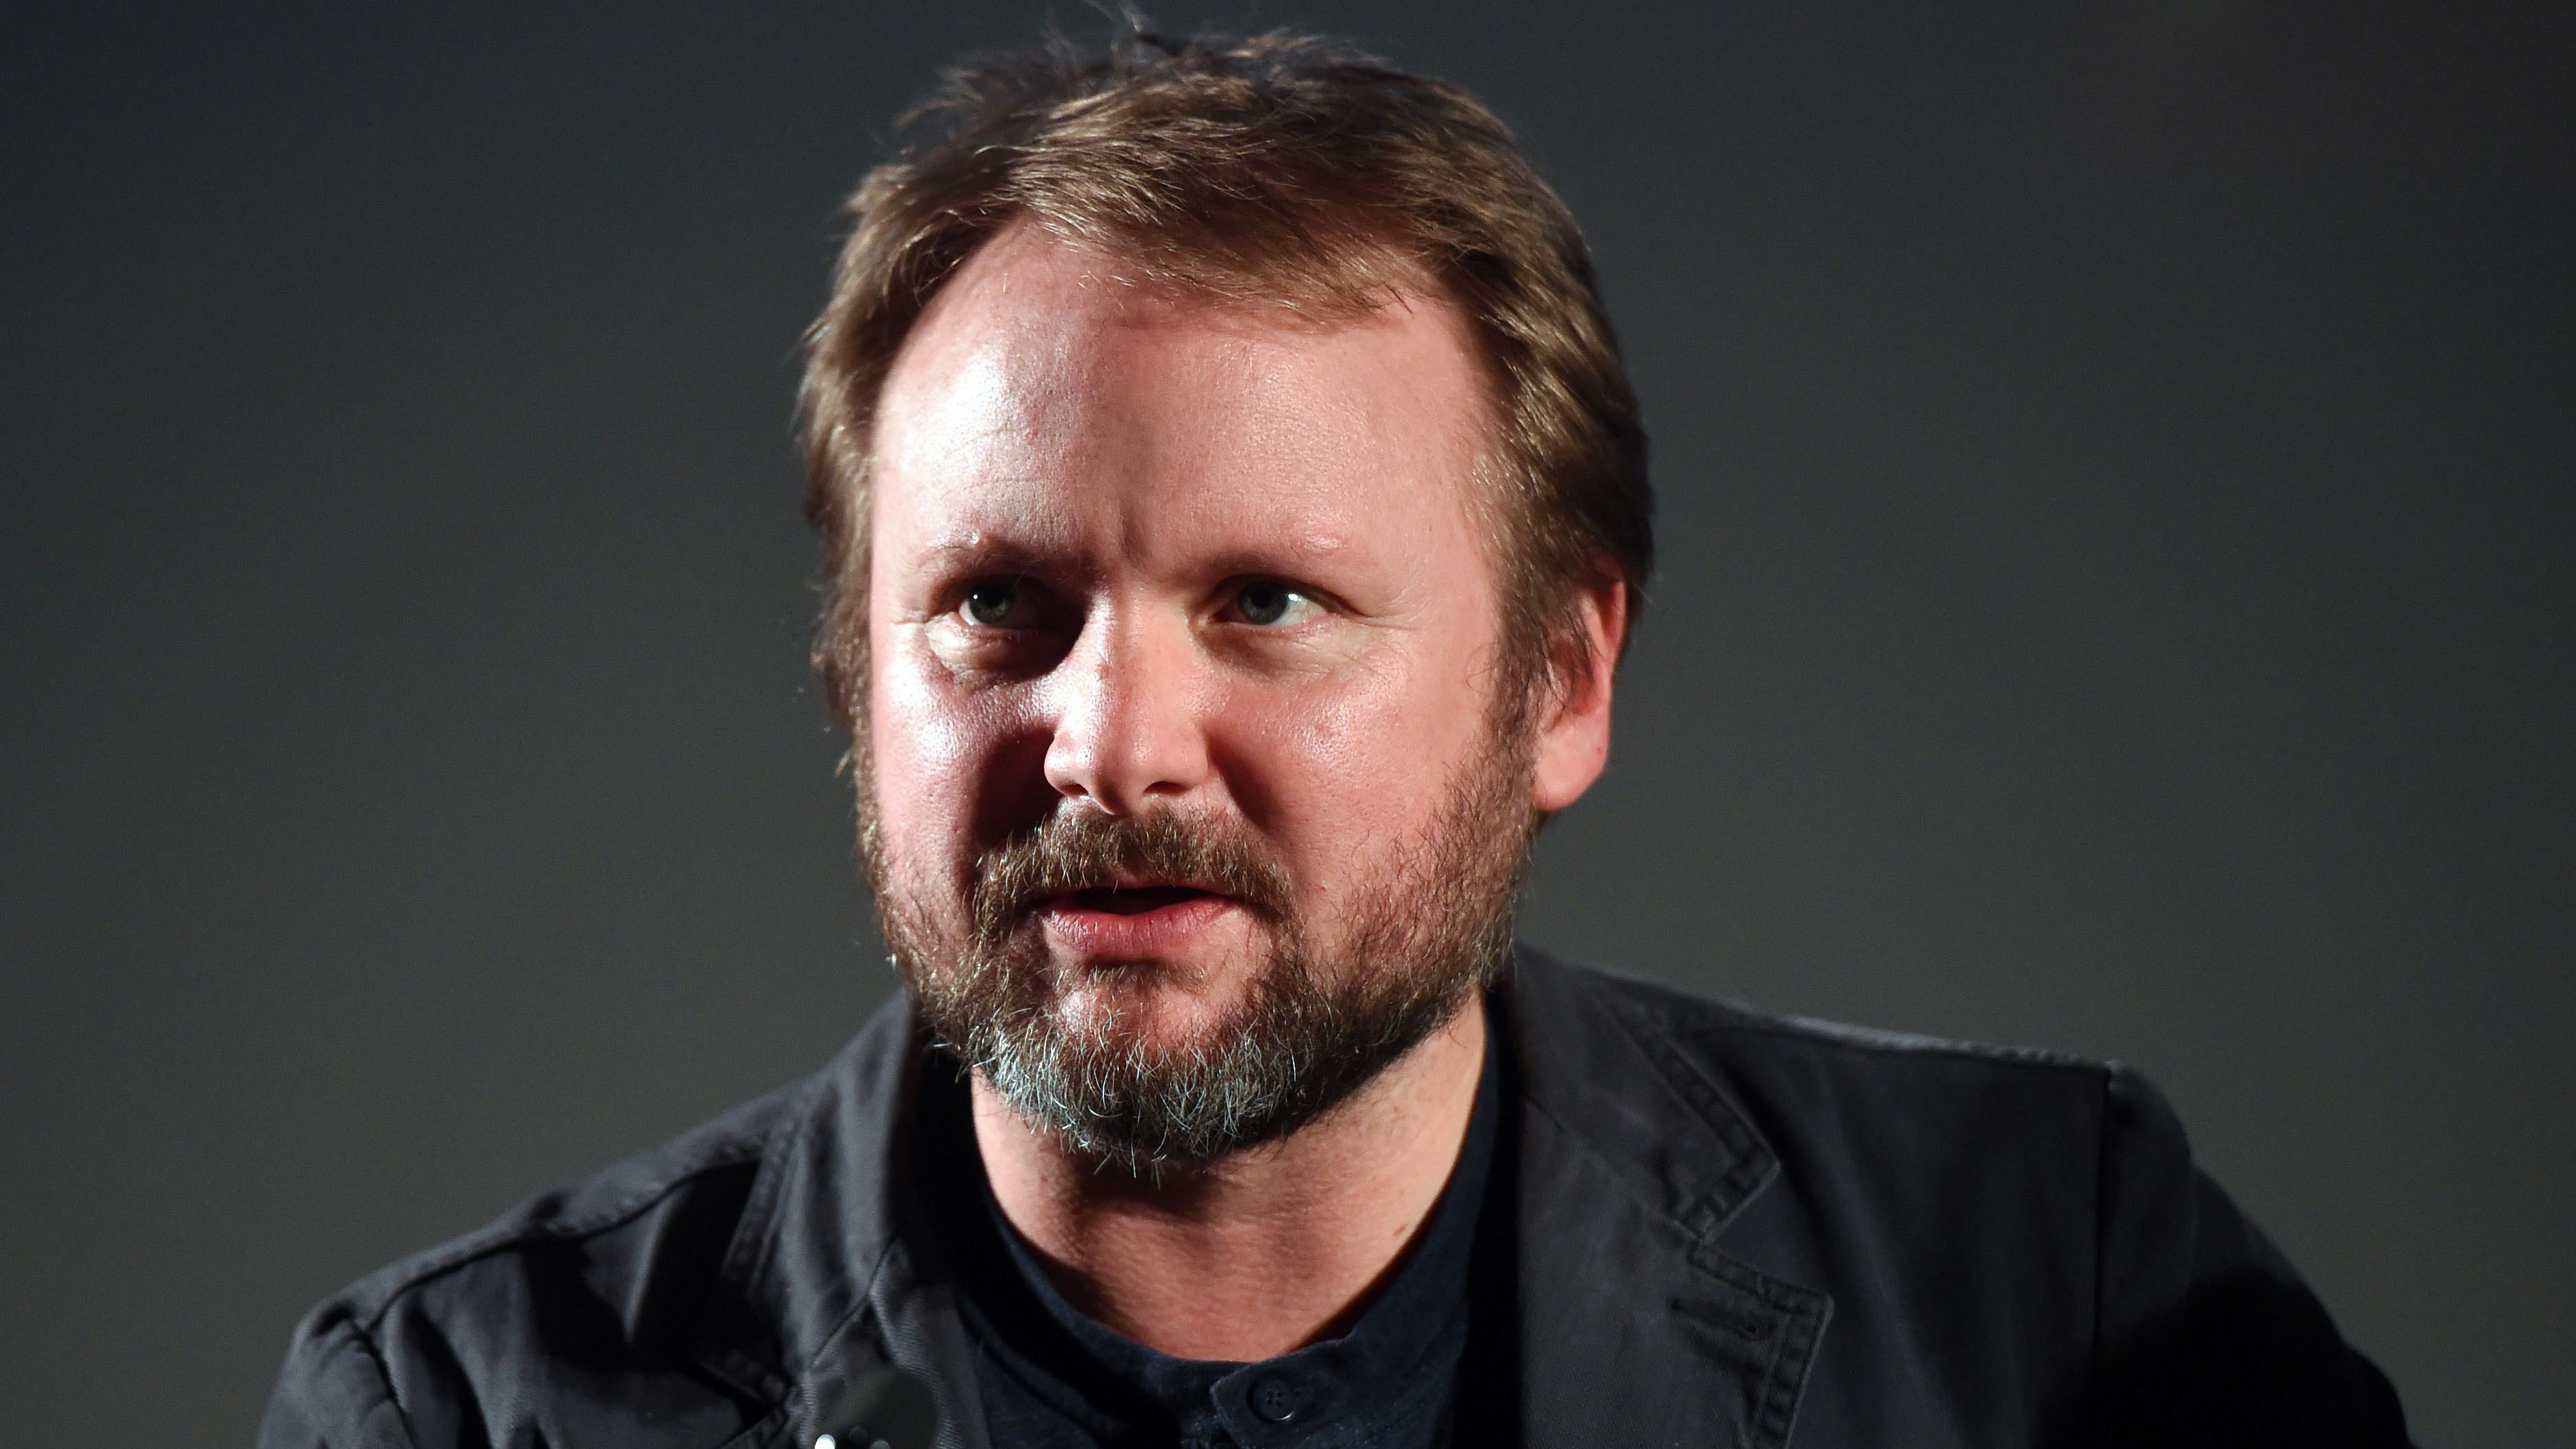 IGN - The Last Jedi director Rian Johnson's untitled Star Wars trilogy is  reportedly still in the works, but dates and timelines haven't been set due  to Johnson's other ongoing projects.